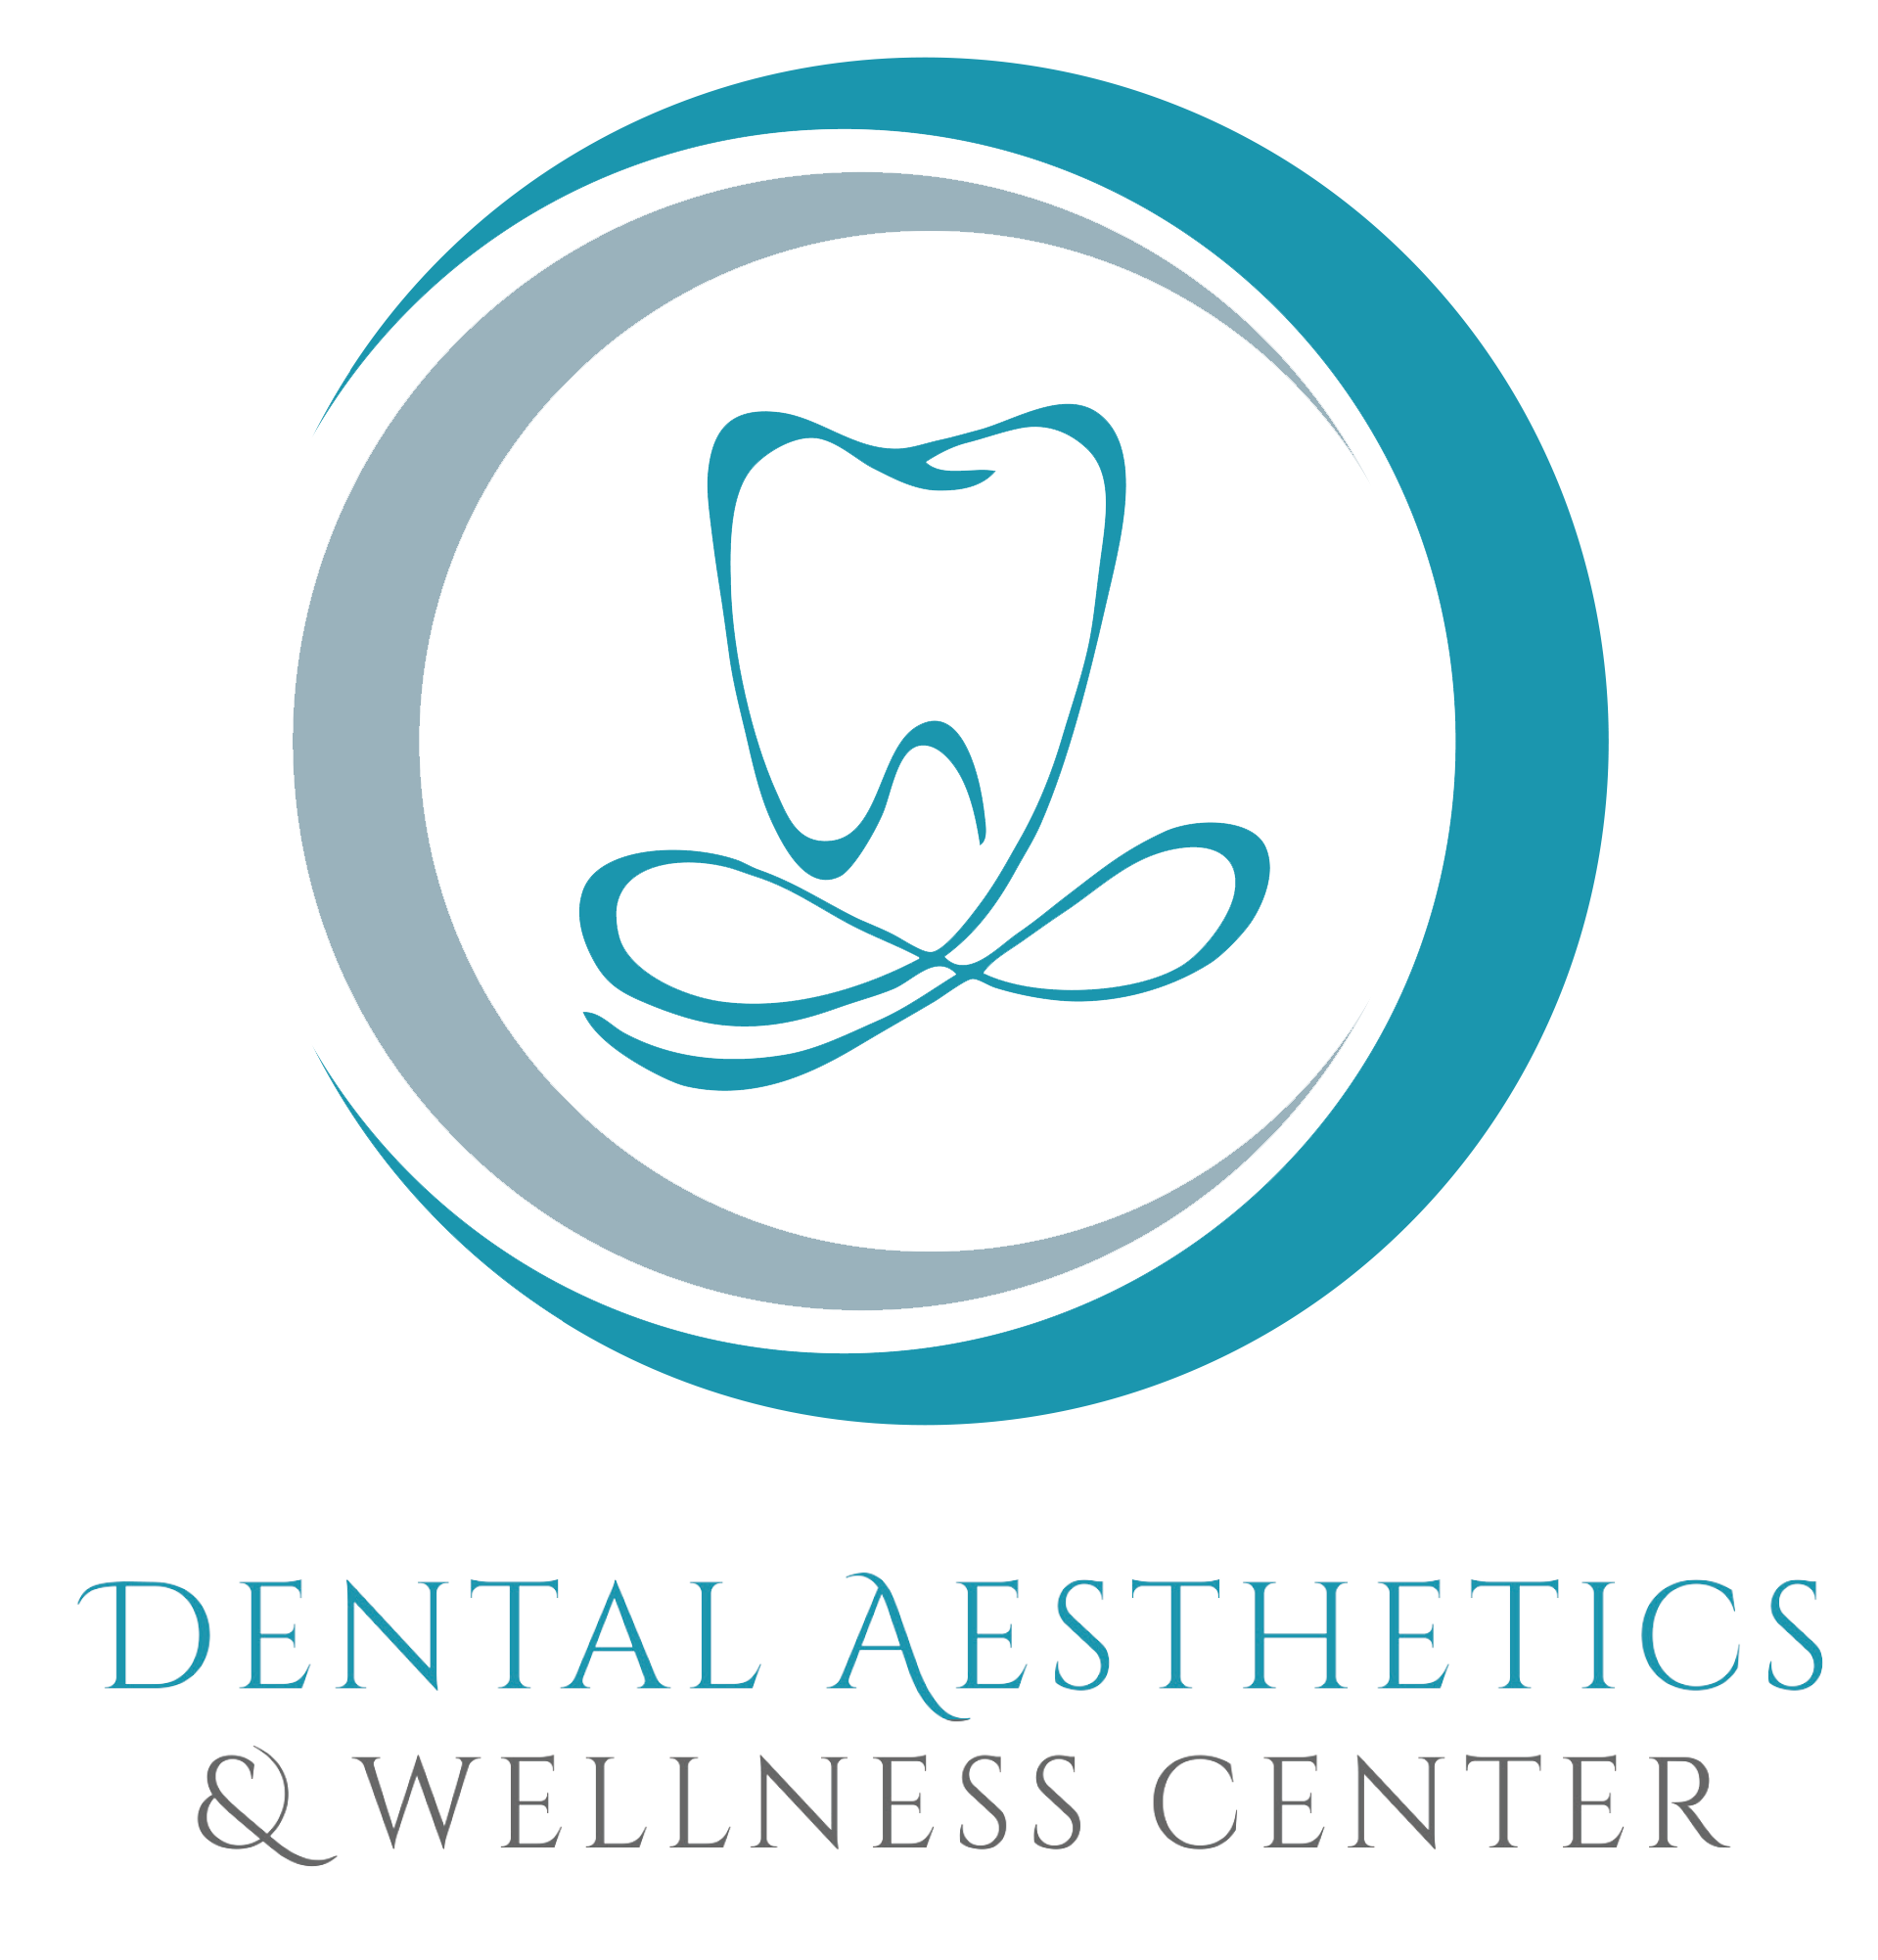 Dental Aesthetics and Wellness Center - Affordable Cosmetic Dentist & Family Dentist in Aliso Viejo, CA 